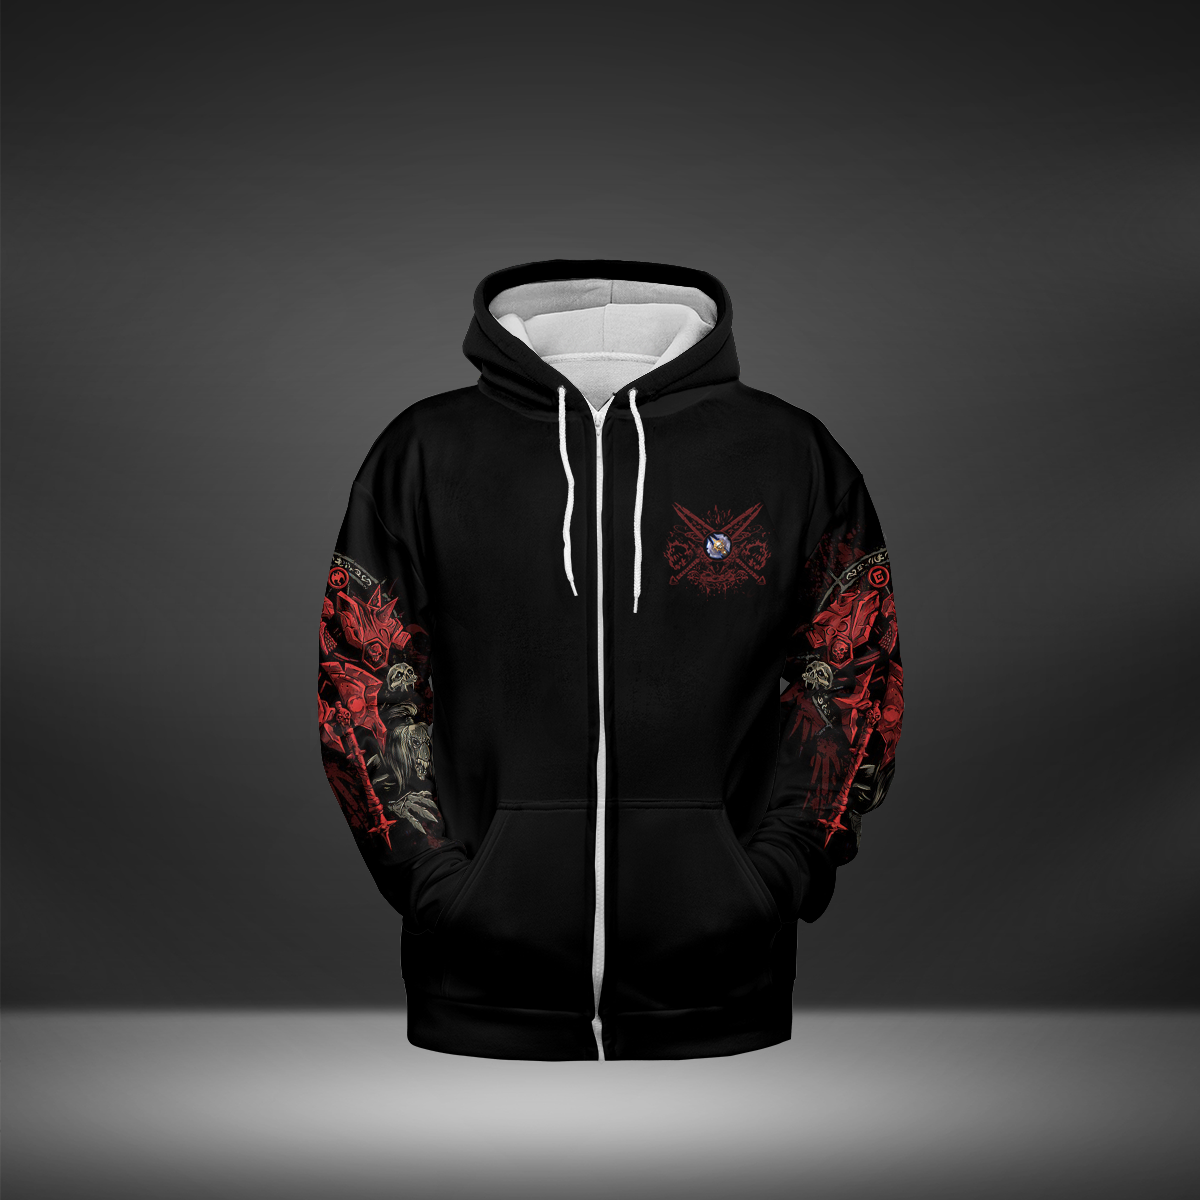 Death Knight Class Definition All-over Print Zip Hoodie ( Midweight )